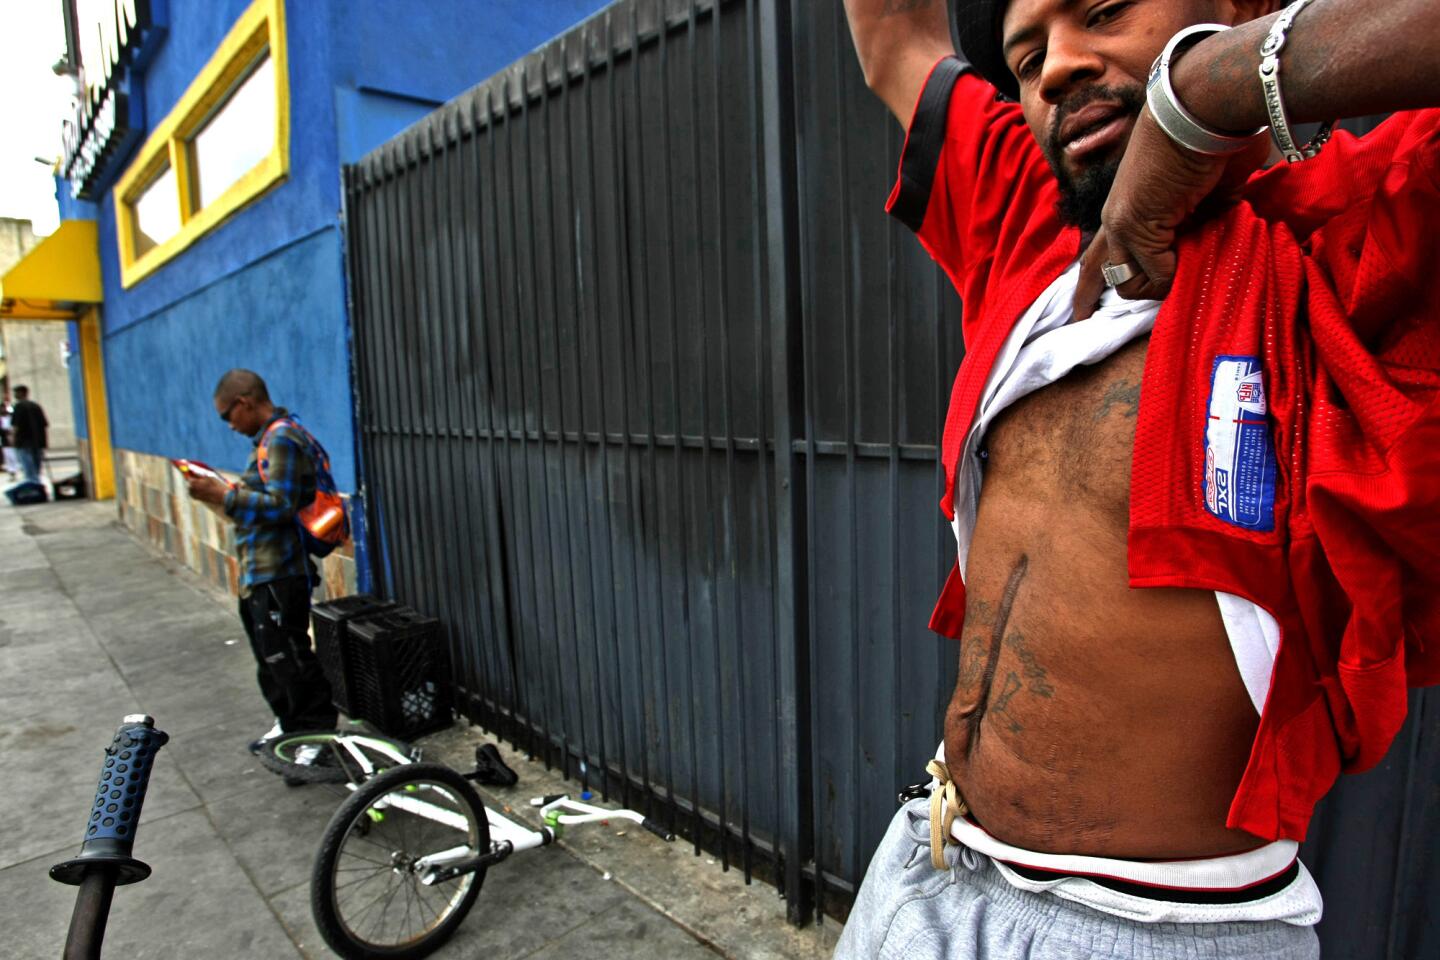 L. Christopher Caver Jr., 38, shows a scar on his stomach, a result of a 2012 shooting when he was hit seven times inside his car. He has lived in the Westmont area of South L.A. for more than a decade.